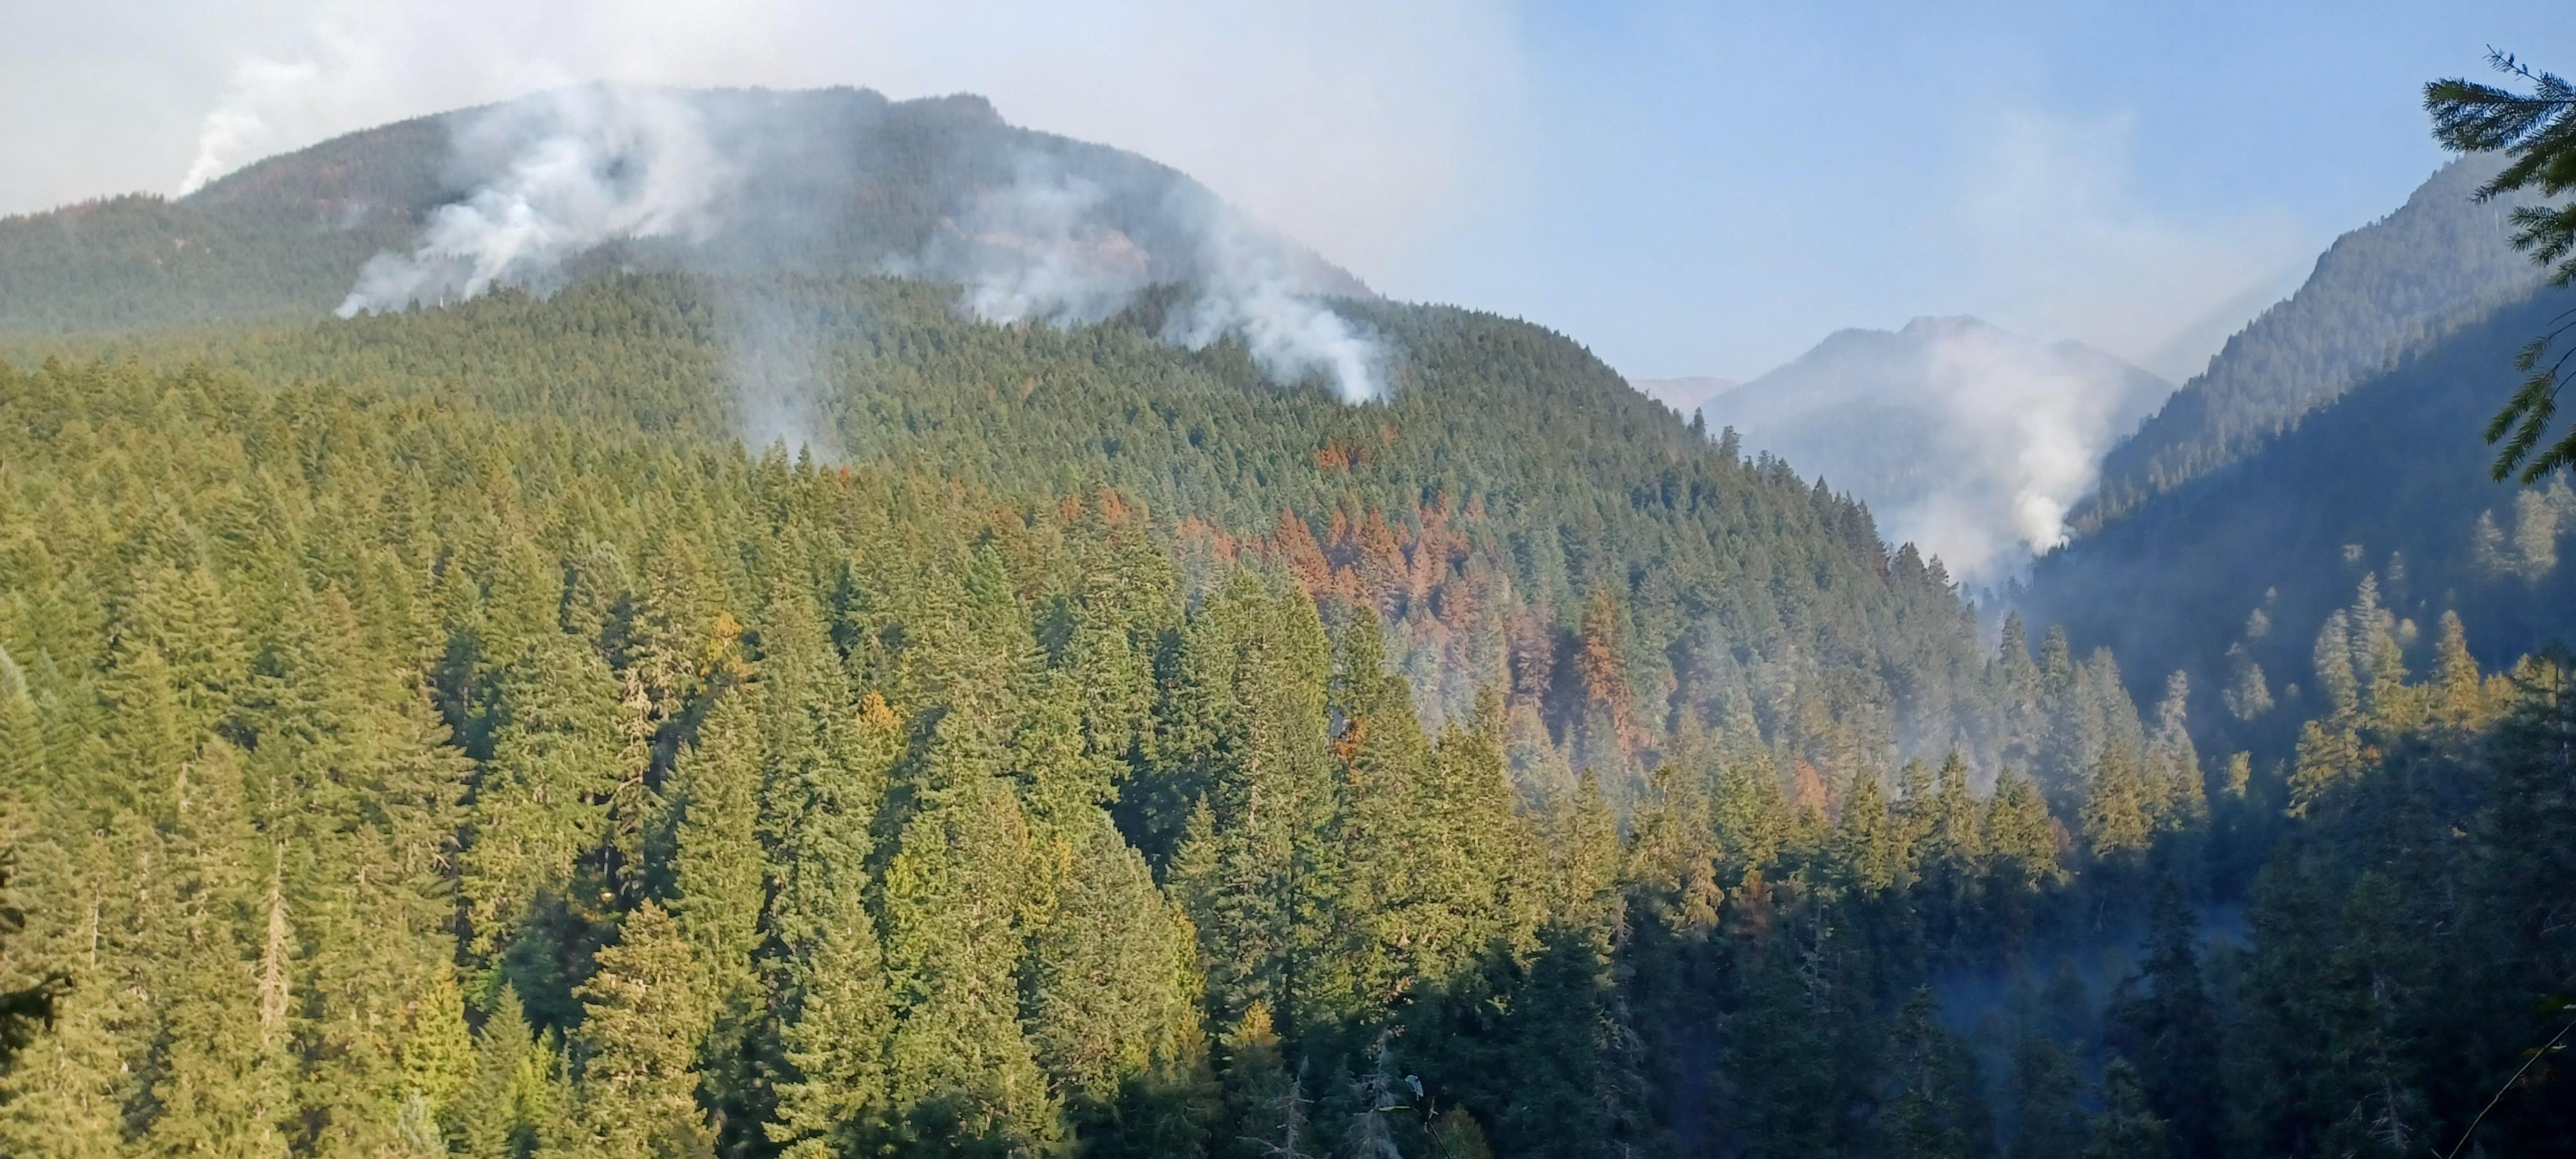 A view of the forested slopes along Coal Creek, with smoke rising from scattered areas.